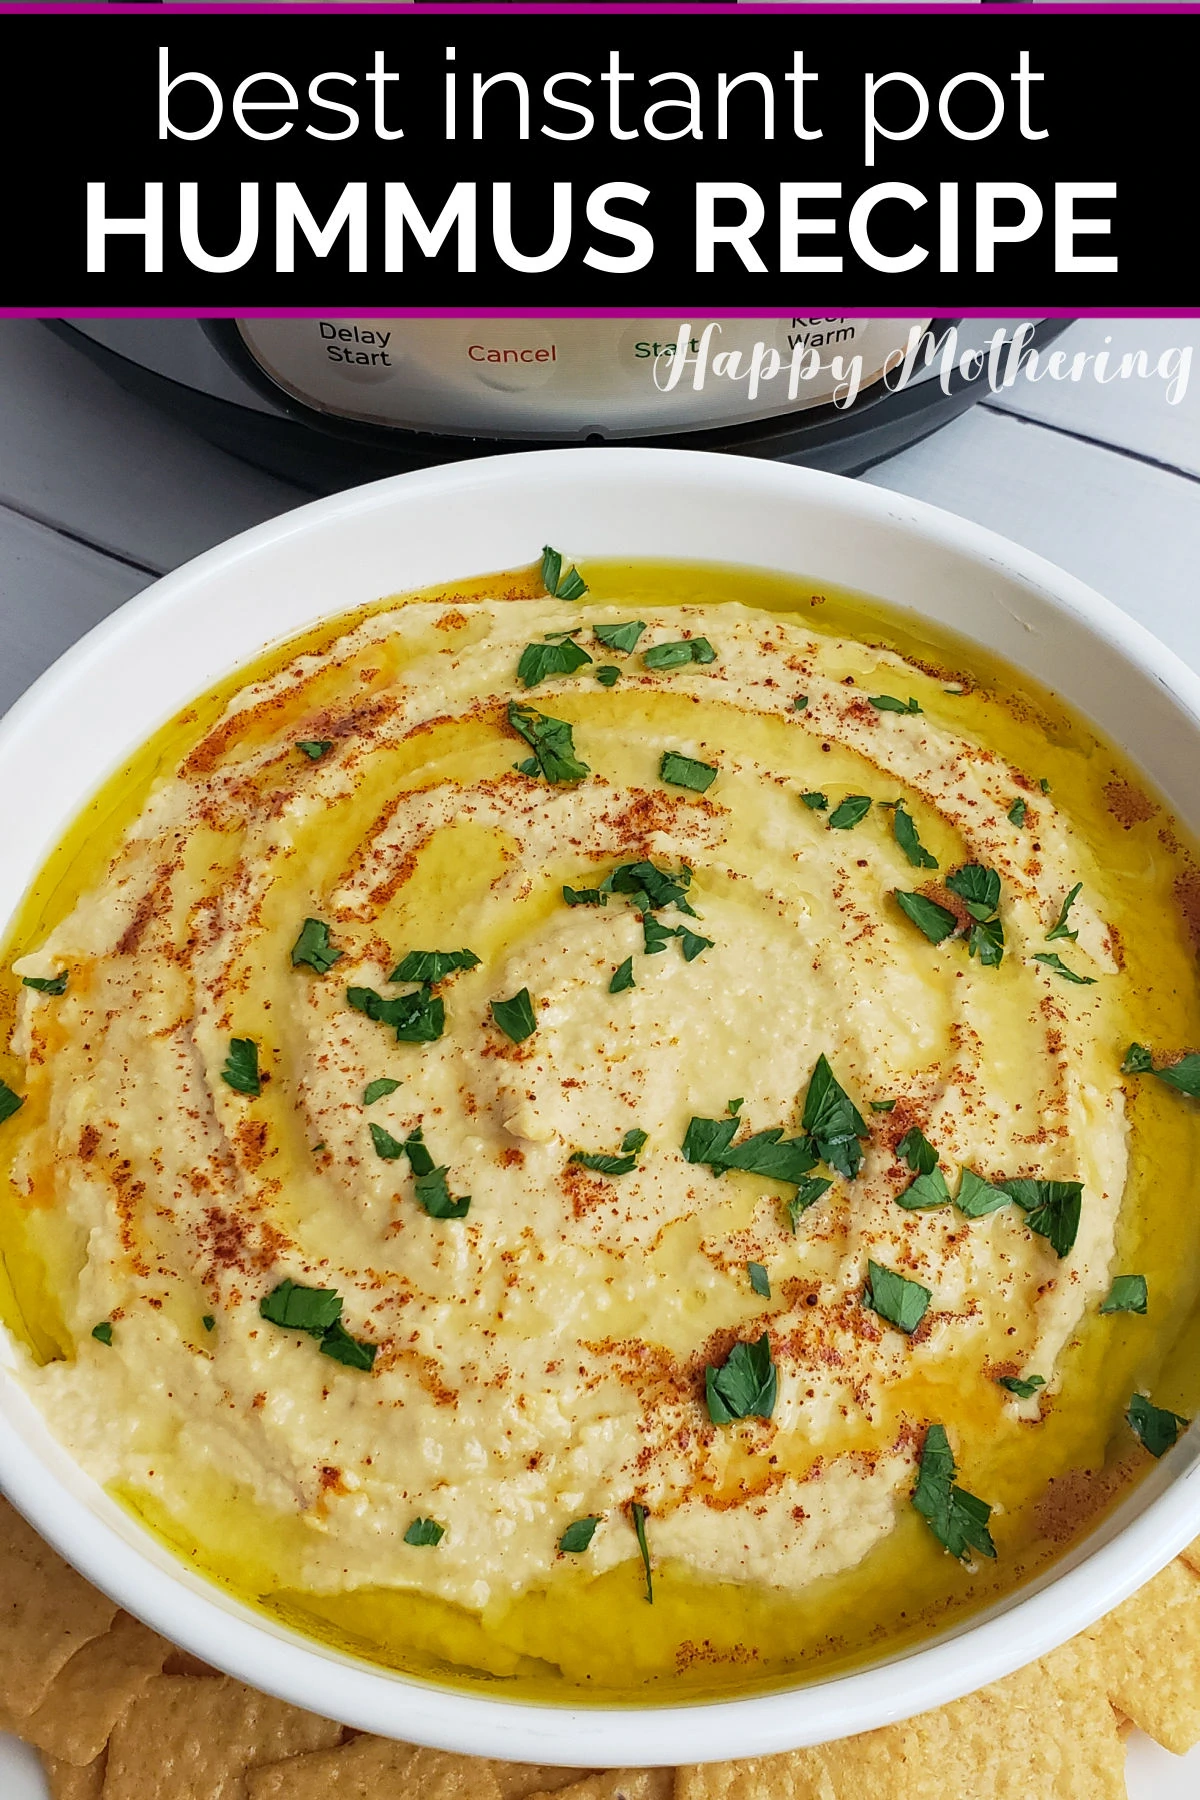 Instant Pot Hummus garnished with olive oil, parsley and paprika in white serving bowl with gluten free crackers.